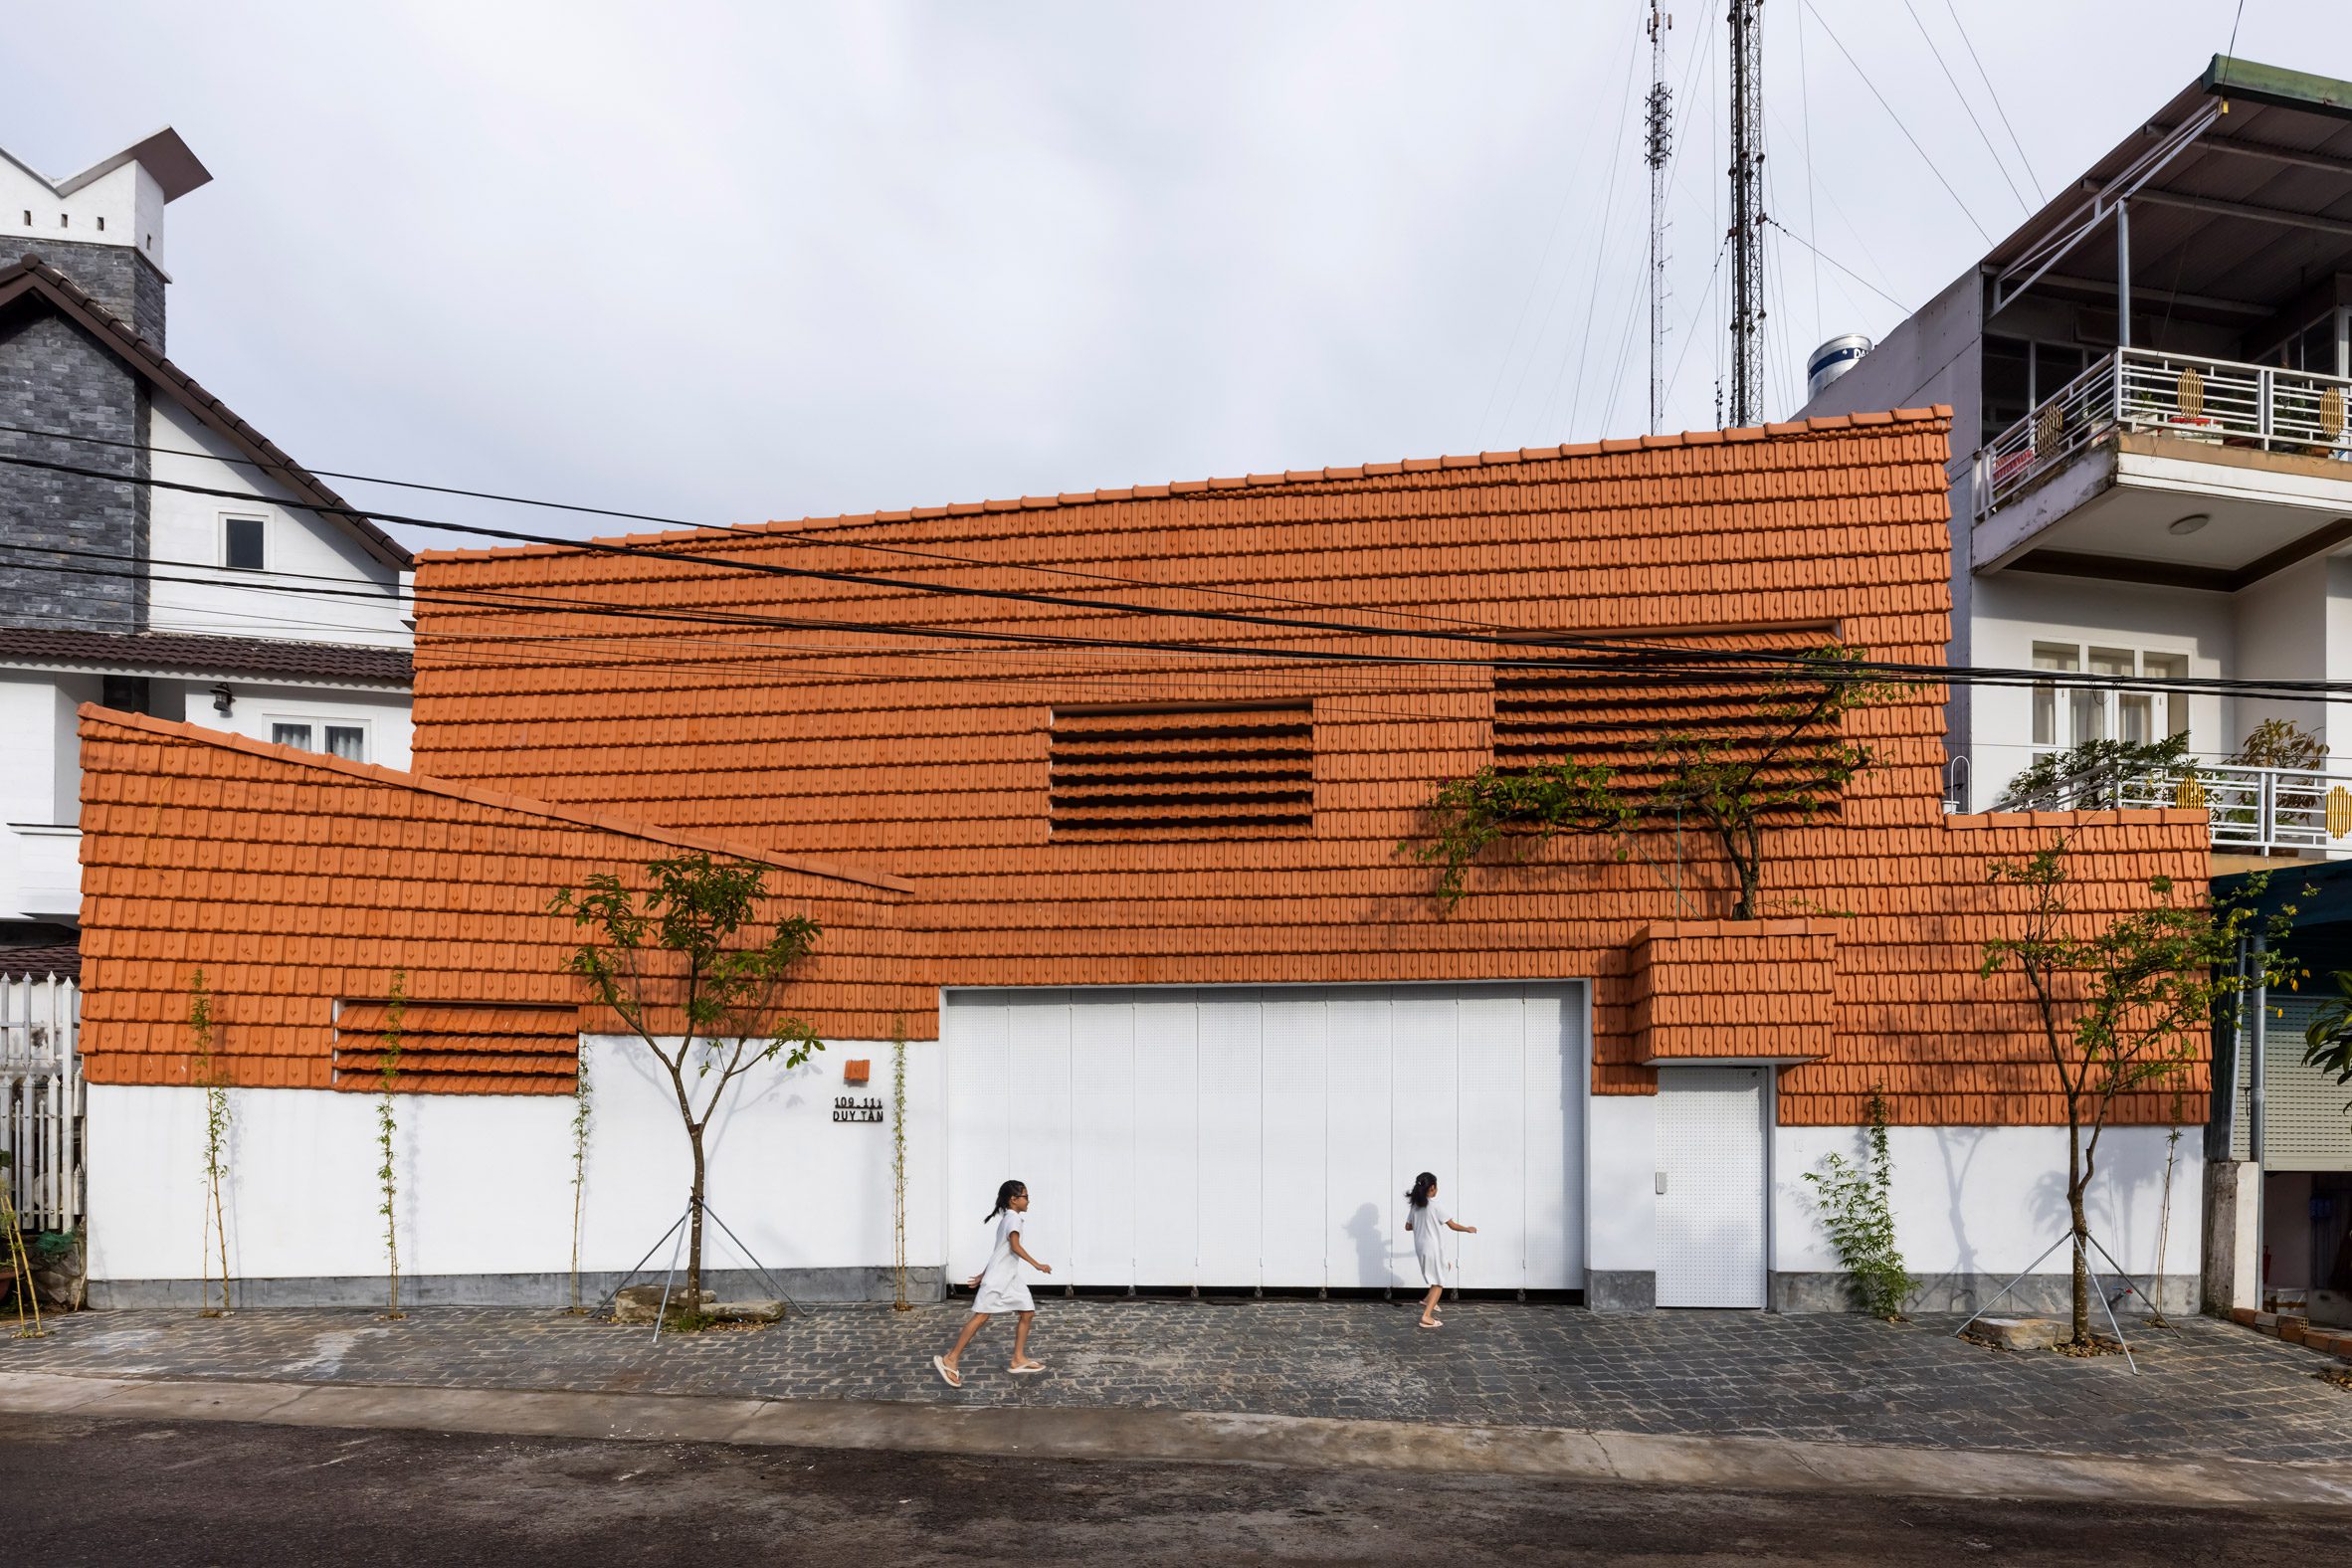 Exterior of Tile House clad in red tiles by The Bloom Architects